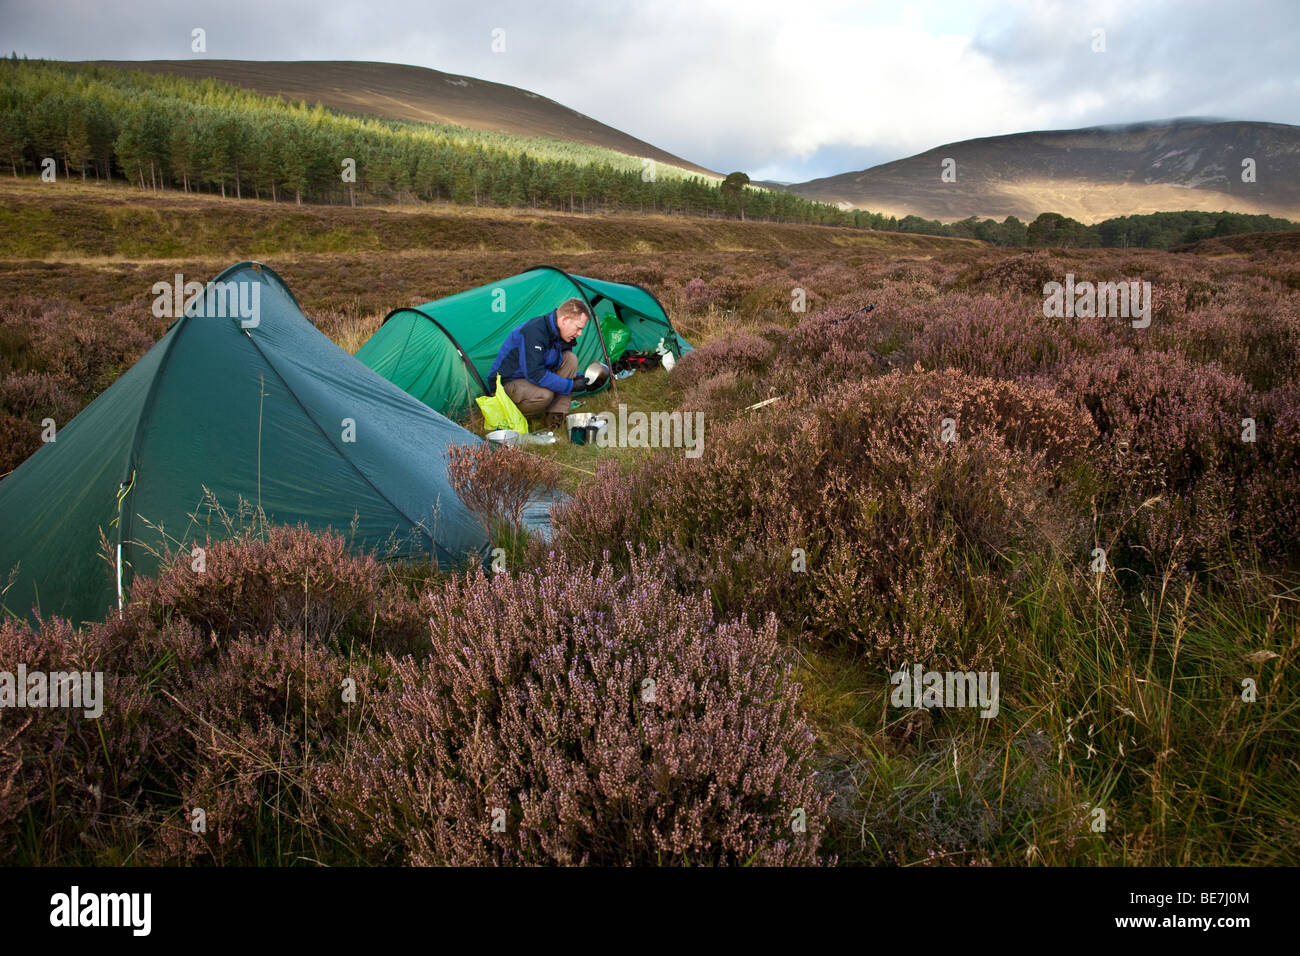 A man preparing to cook outside his tent among the heather in the Cairngorm mountains, Scotland Stock Photo